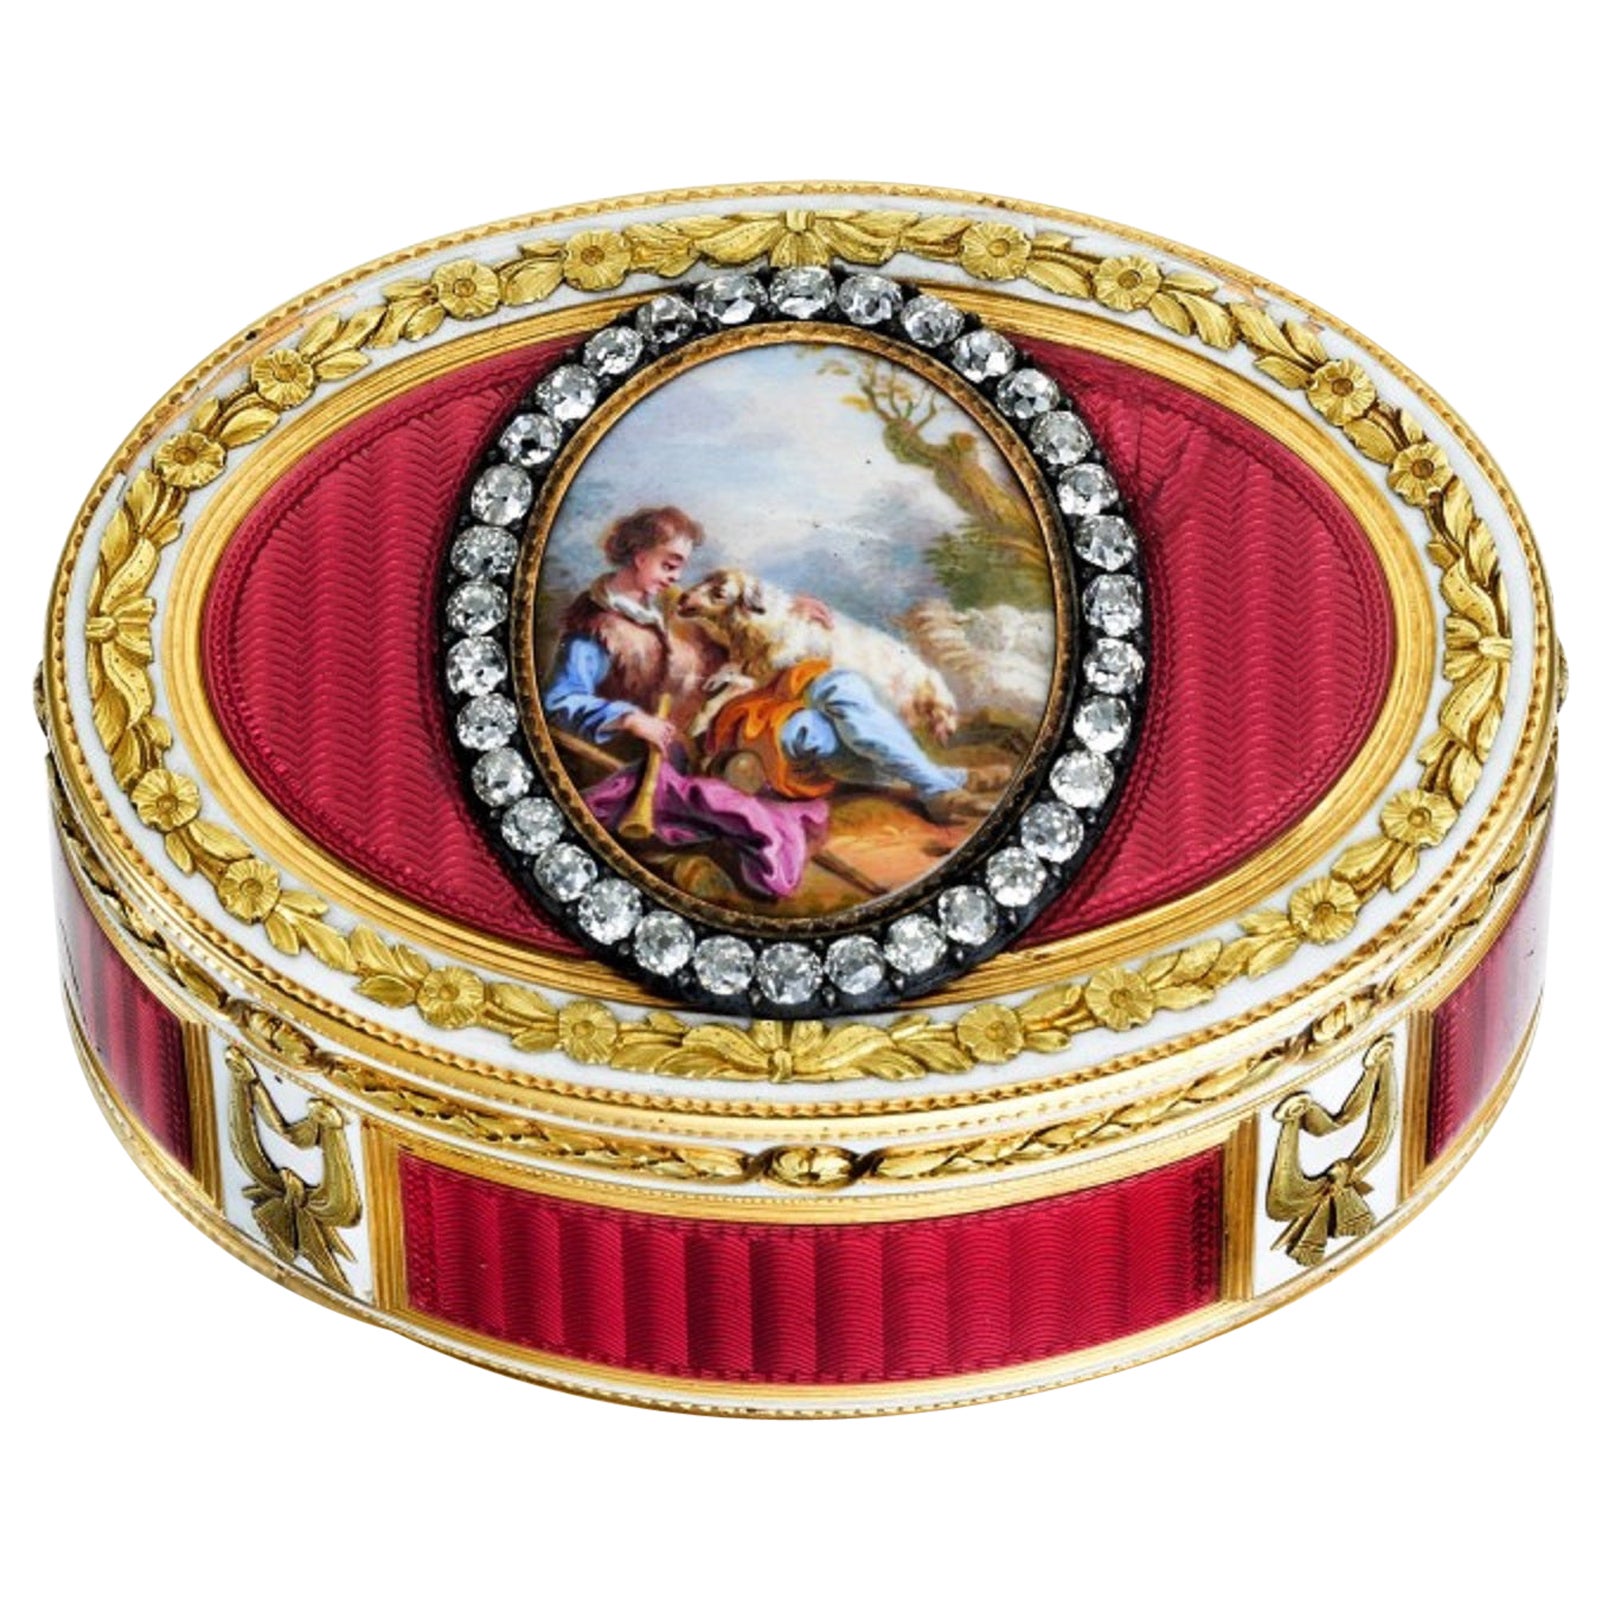 Jewelled Two-Colour Gold and Enamel Snuff Box, Charles Le Bastier, Paris, 1775